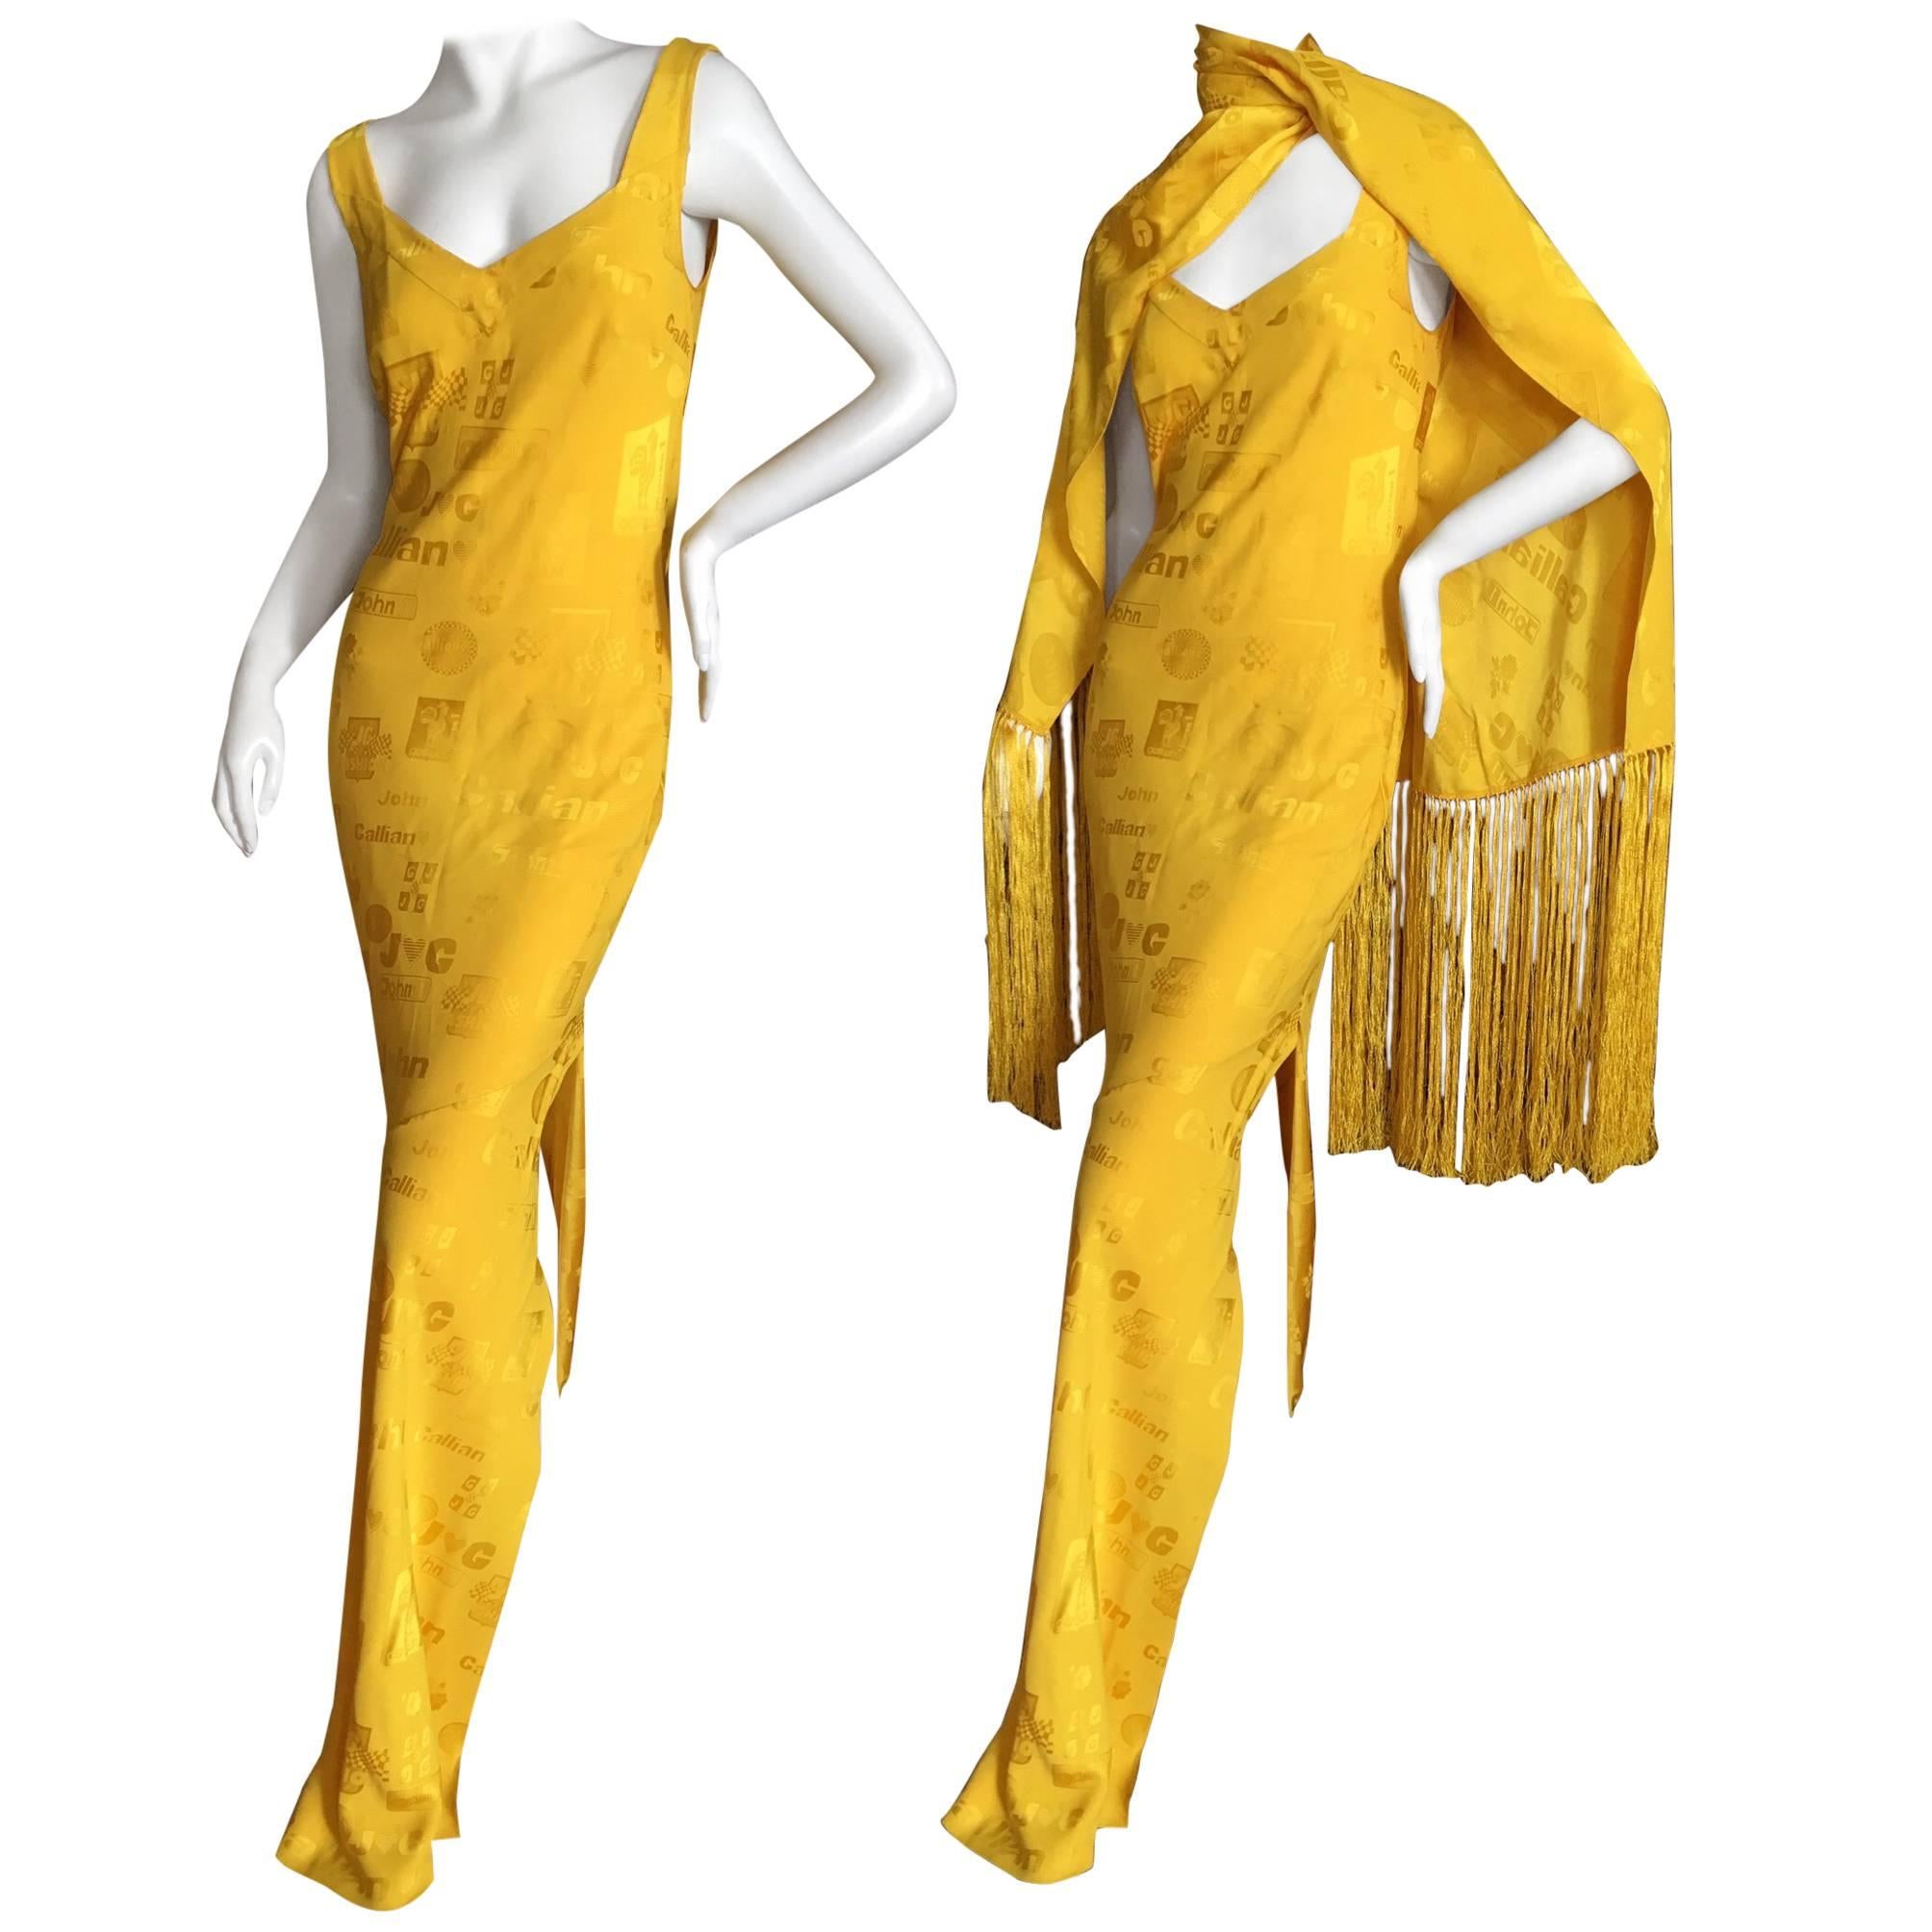 Brilliant yellow bias cut long dress and matching shawl from John Galliano circa 1996.
The Galliano logo's were inspired by classic Nascar logo's.
There is a high side slit.
Size 42
Bust 39